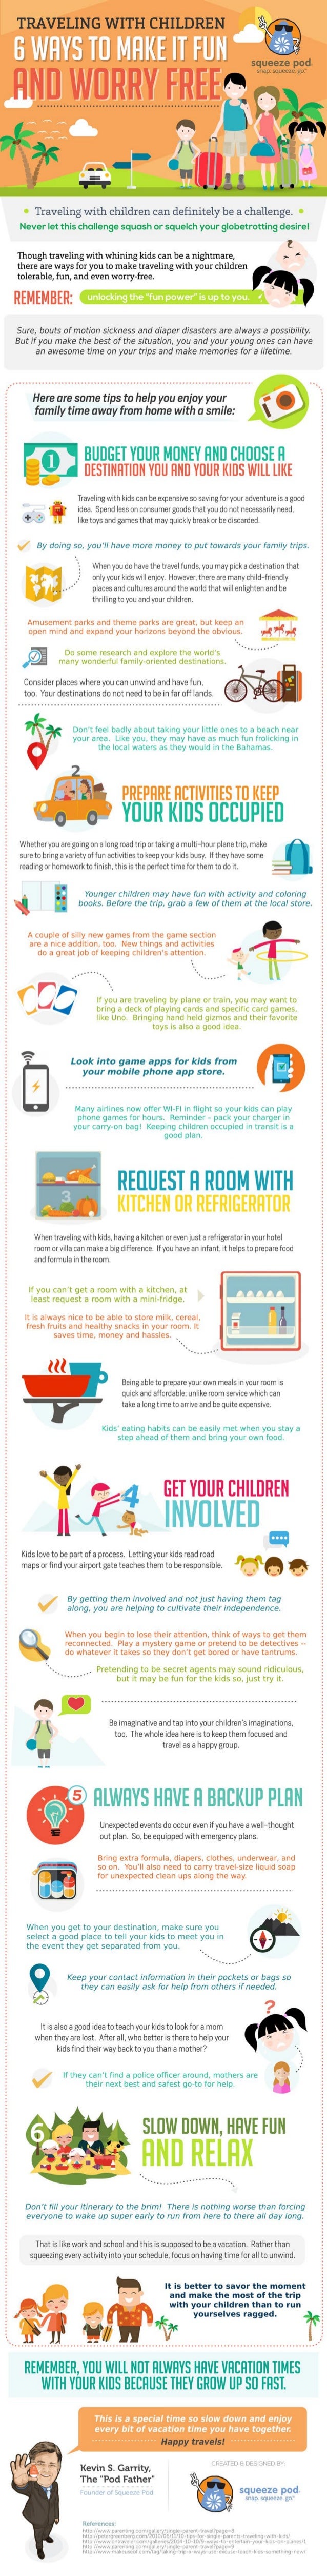 Traveling With Children 6 Ways To Make It Fun And Worry Free